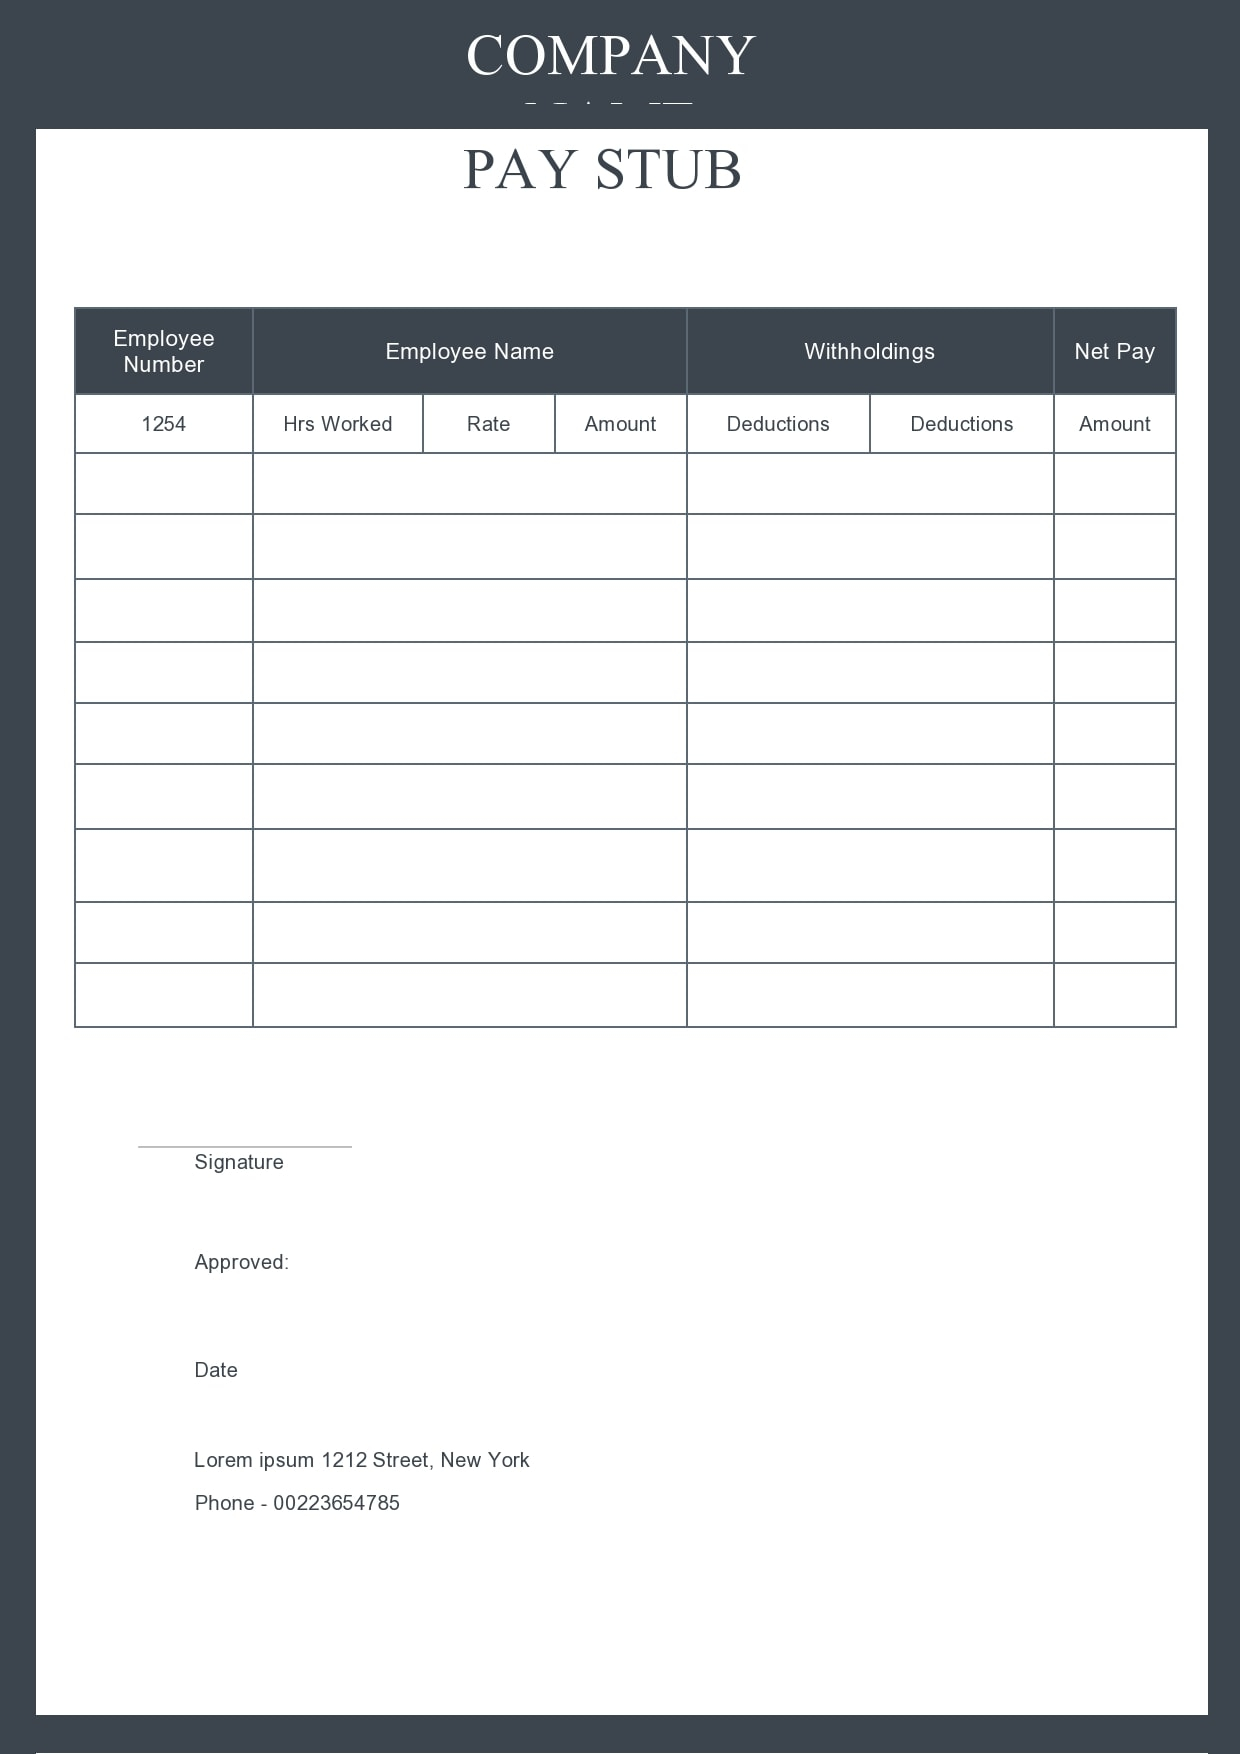 10 Free Pay Stub Templates [Excel, Word] - PrintableTemplates Within Blank Pay Stubs Template